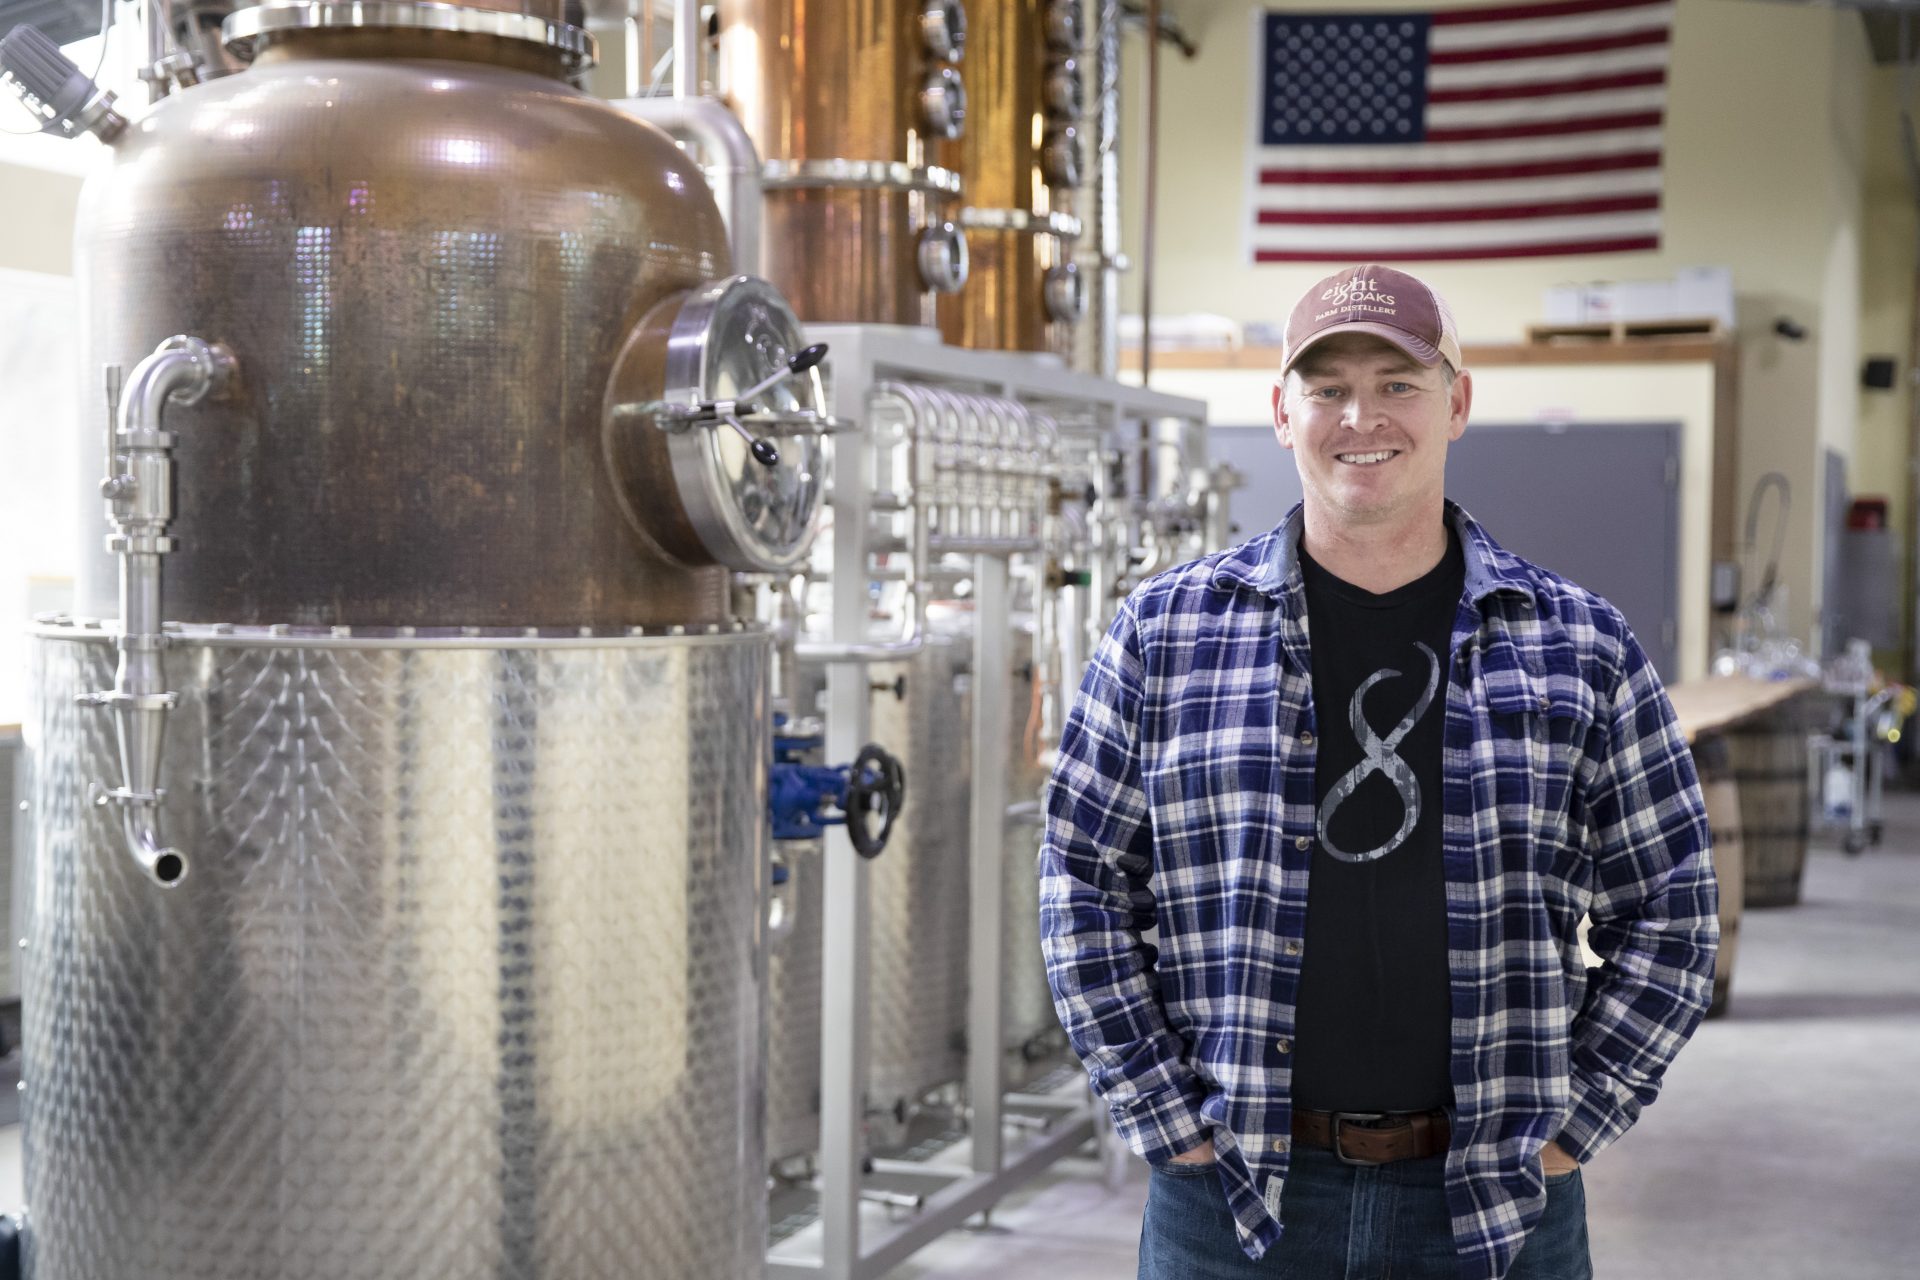 Chad Butters, founder of Eight Oaks Farm Distillery, poses for a photo at their facility in New Tripoli, Pa., Monday, March 16, 2020. Butters, who grew increasingly angry as he saw the skyrocketing price of hand sanitizer, has decided to do something about it: He's temporarily converting his operation into a production line for the suddenly hard-to-find, gooey, alcohol-based disinfectant.